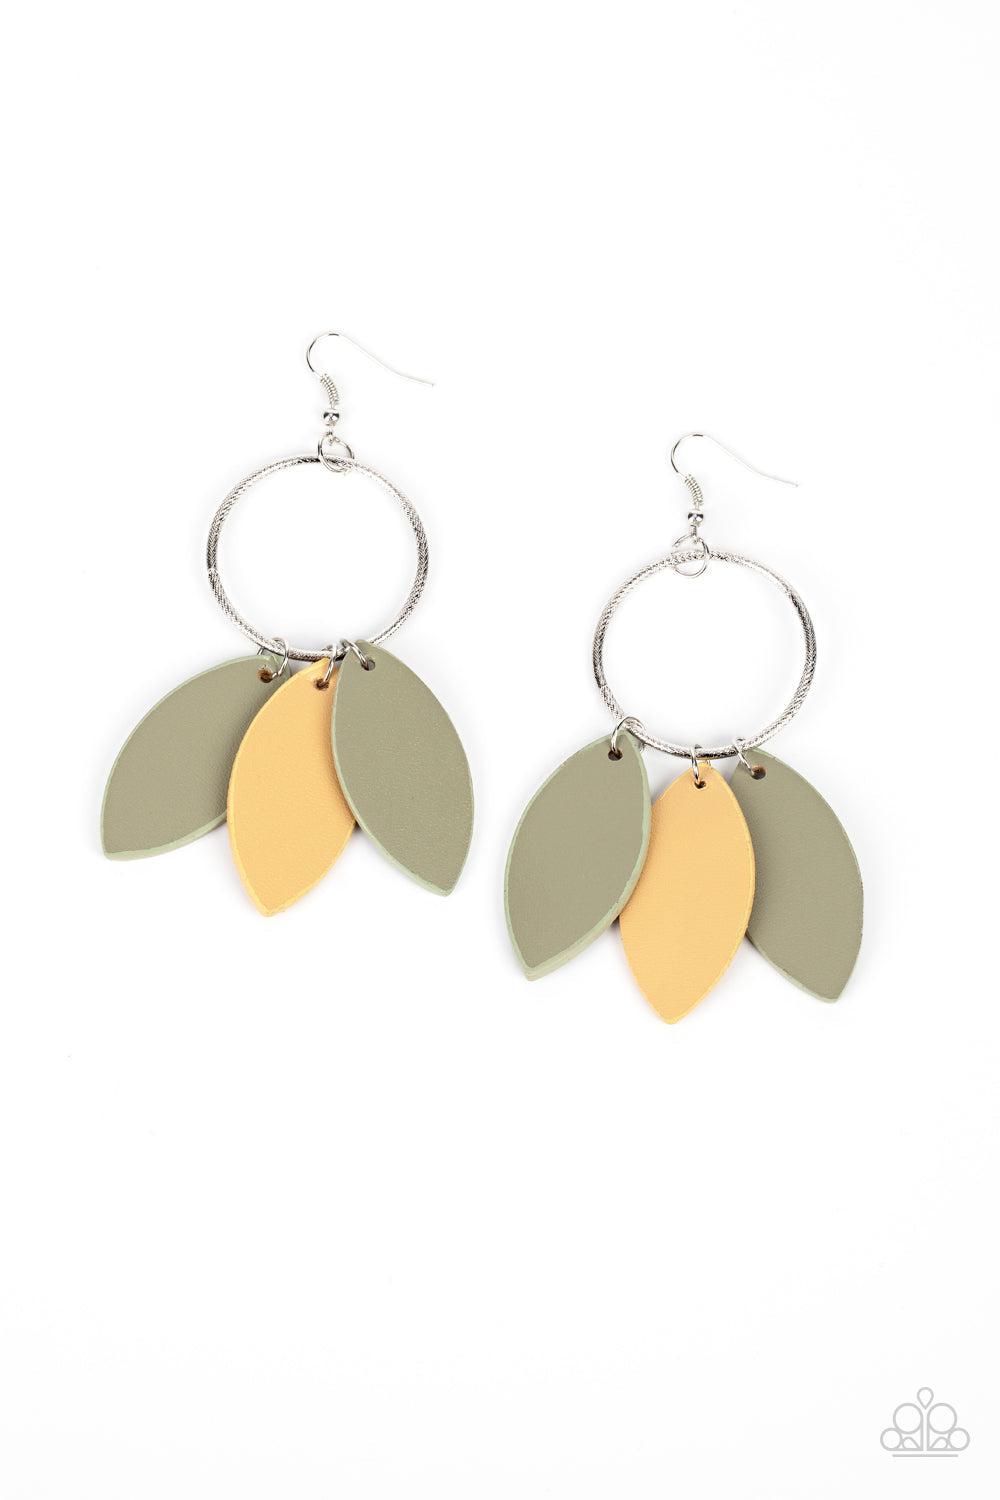 Leafy Laguna Multi Green and Tan Leather Earrings - Paparazzi Accessories- lightbox - CarasShop.com - $5 Jewelry by Cara Jewels